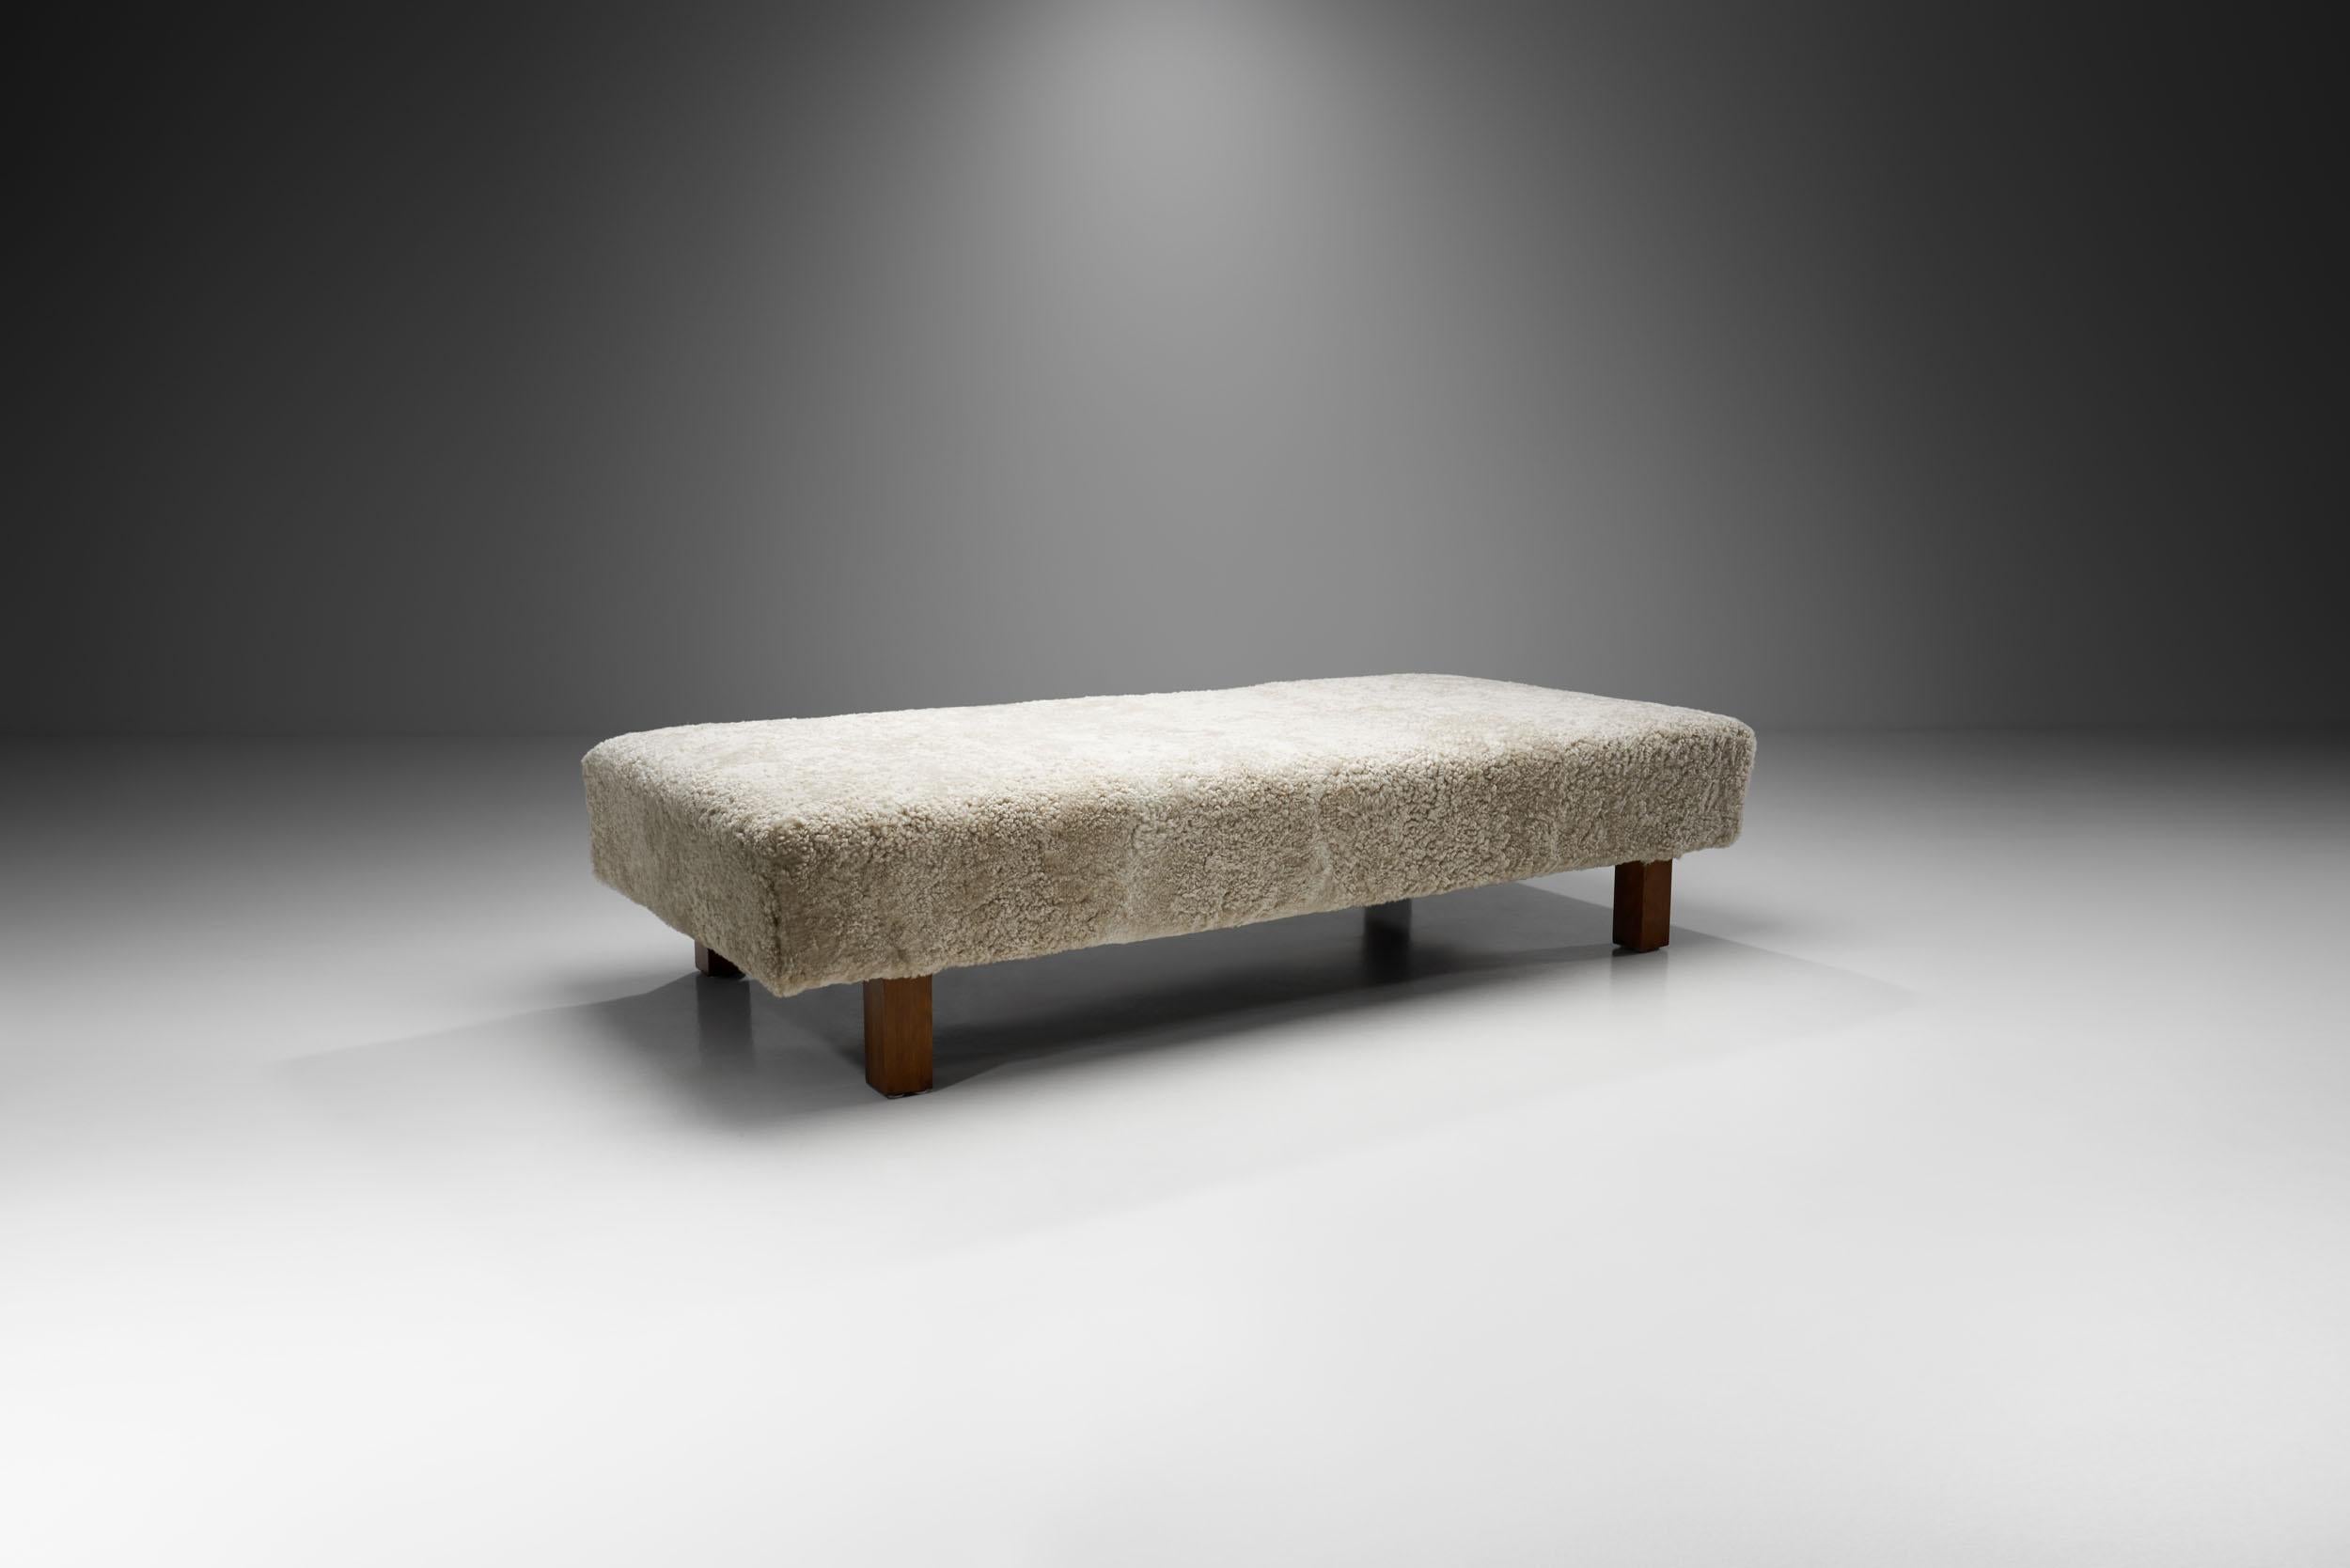 This gorgeous daybed with stained beech legs was inspired by classic Danish furniture design and simplicity. ‘Danish Modern’ is a recognized term around the world, standing for the characteristic style of Danish design created during the 20th